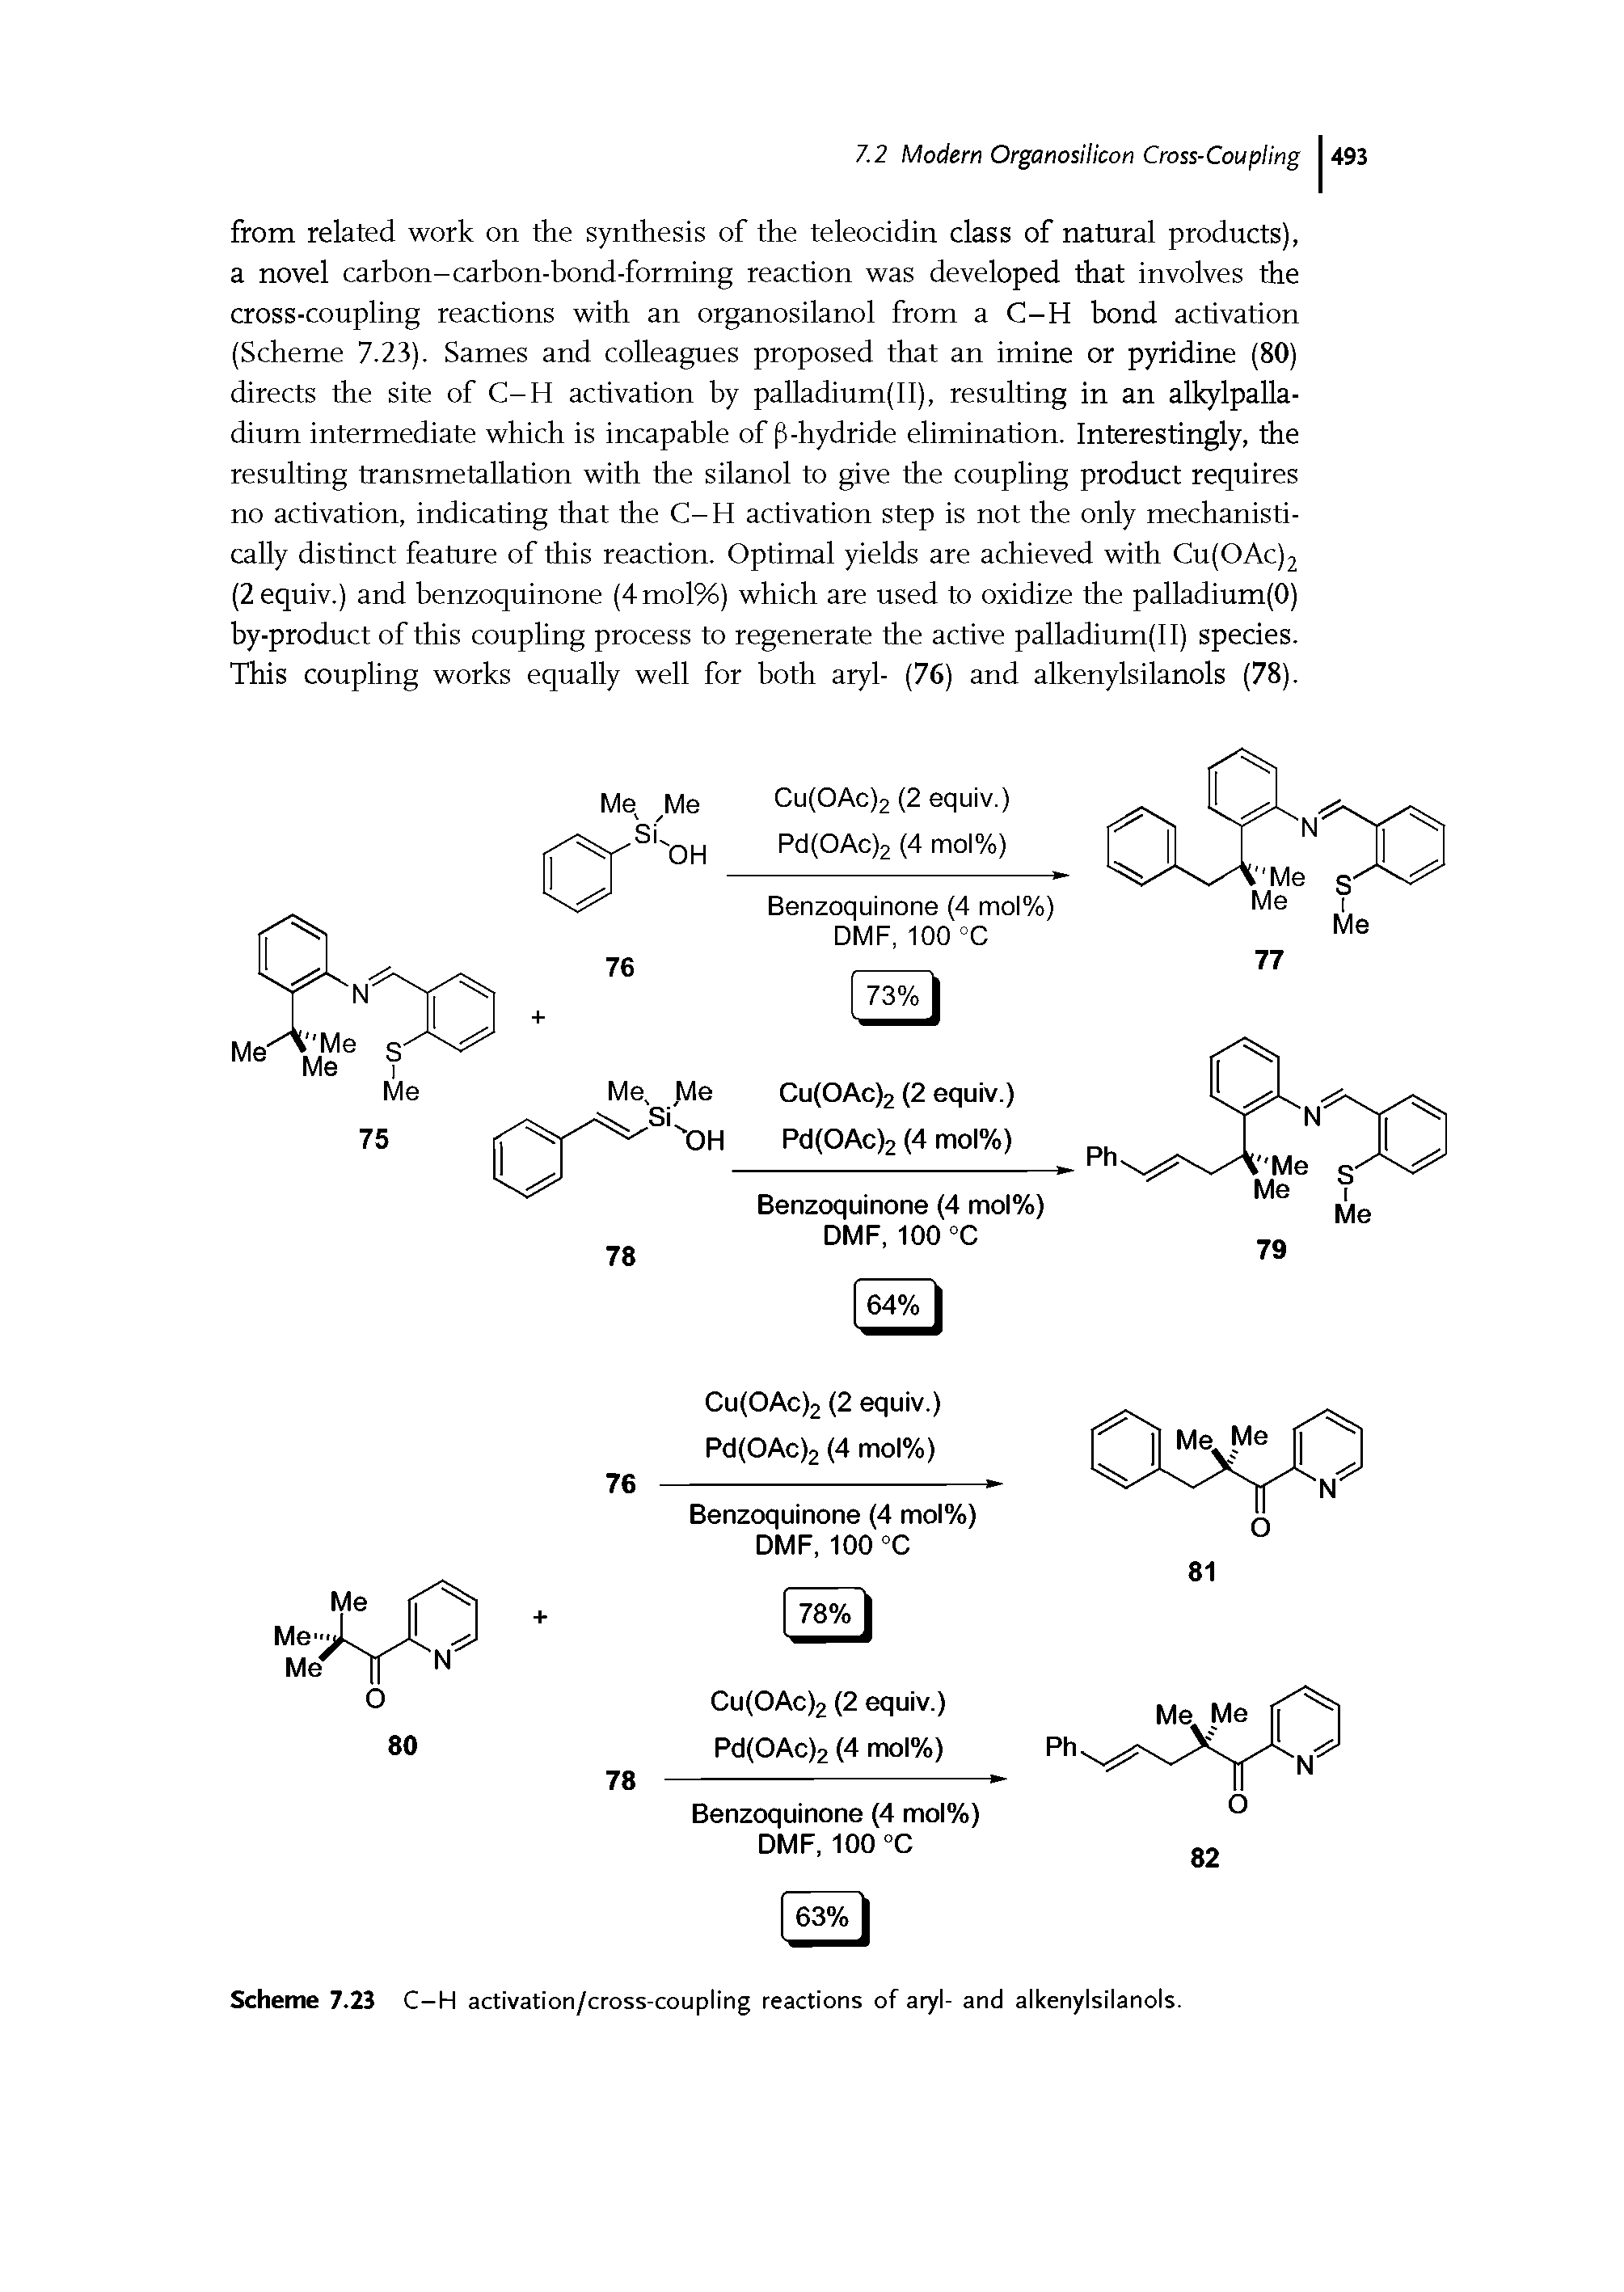 Scheme 7.23 C-H activation/cross-coupling reactions of aryl- and alkenylsilanols.